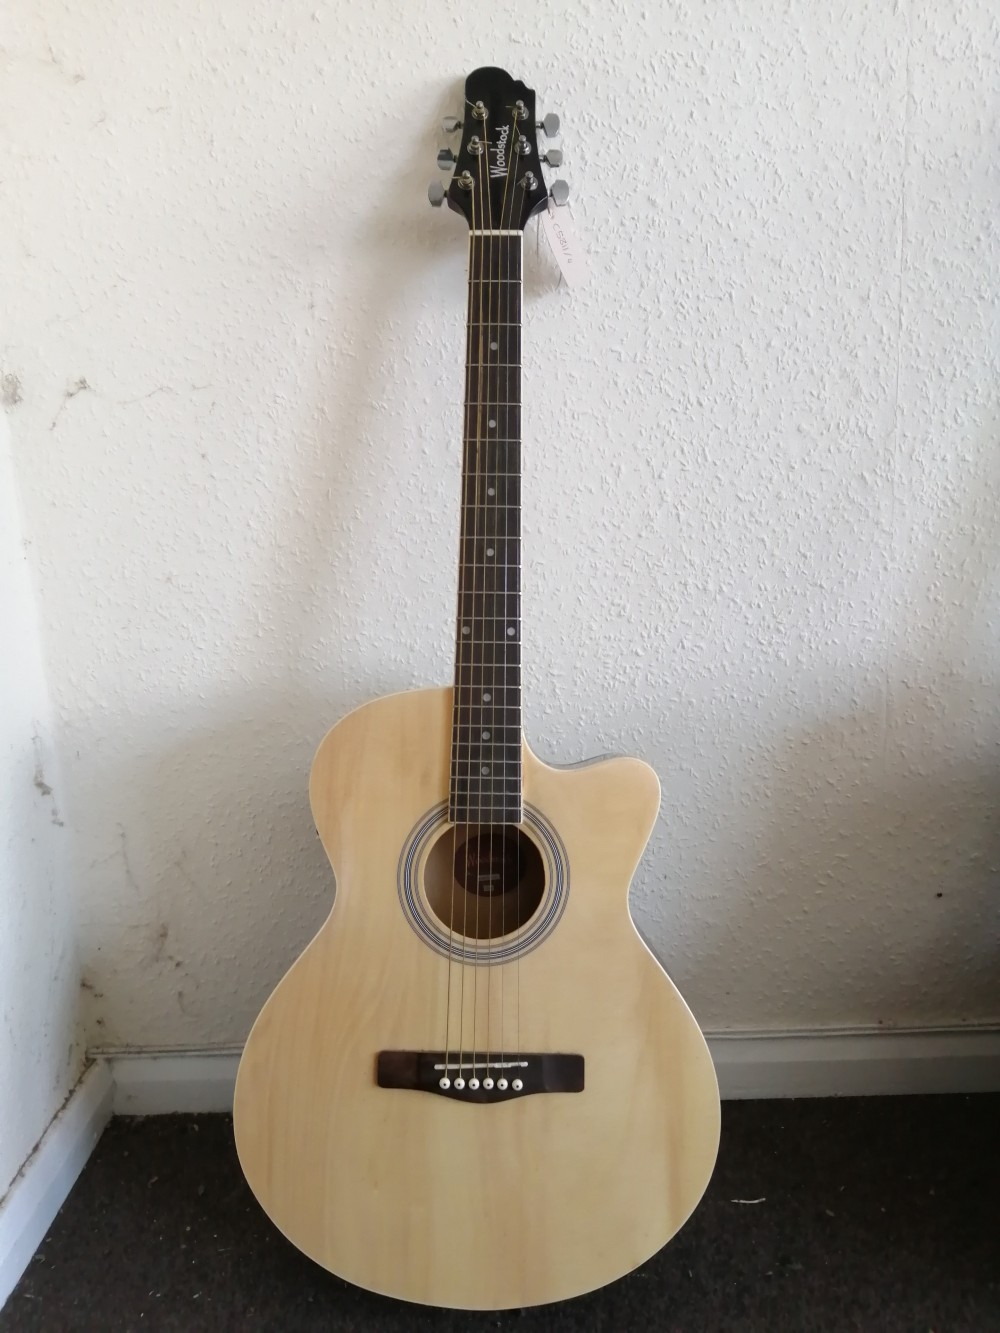 A Woodstock electro acoustic guitar